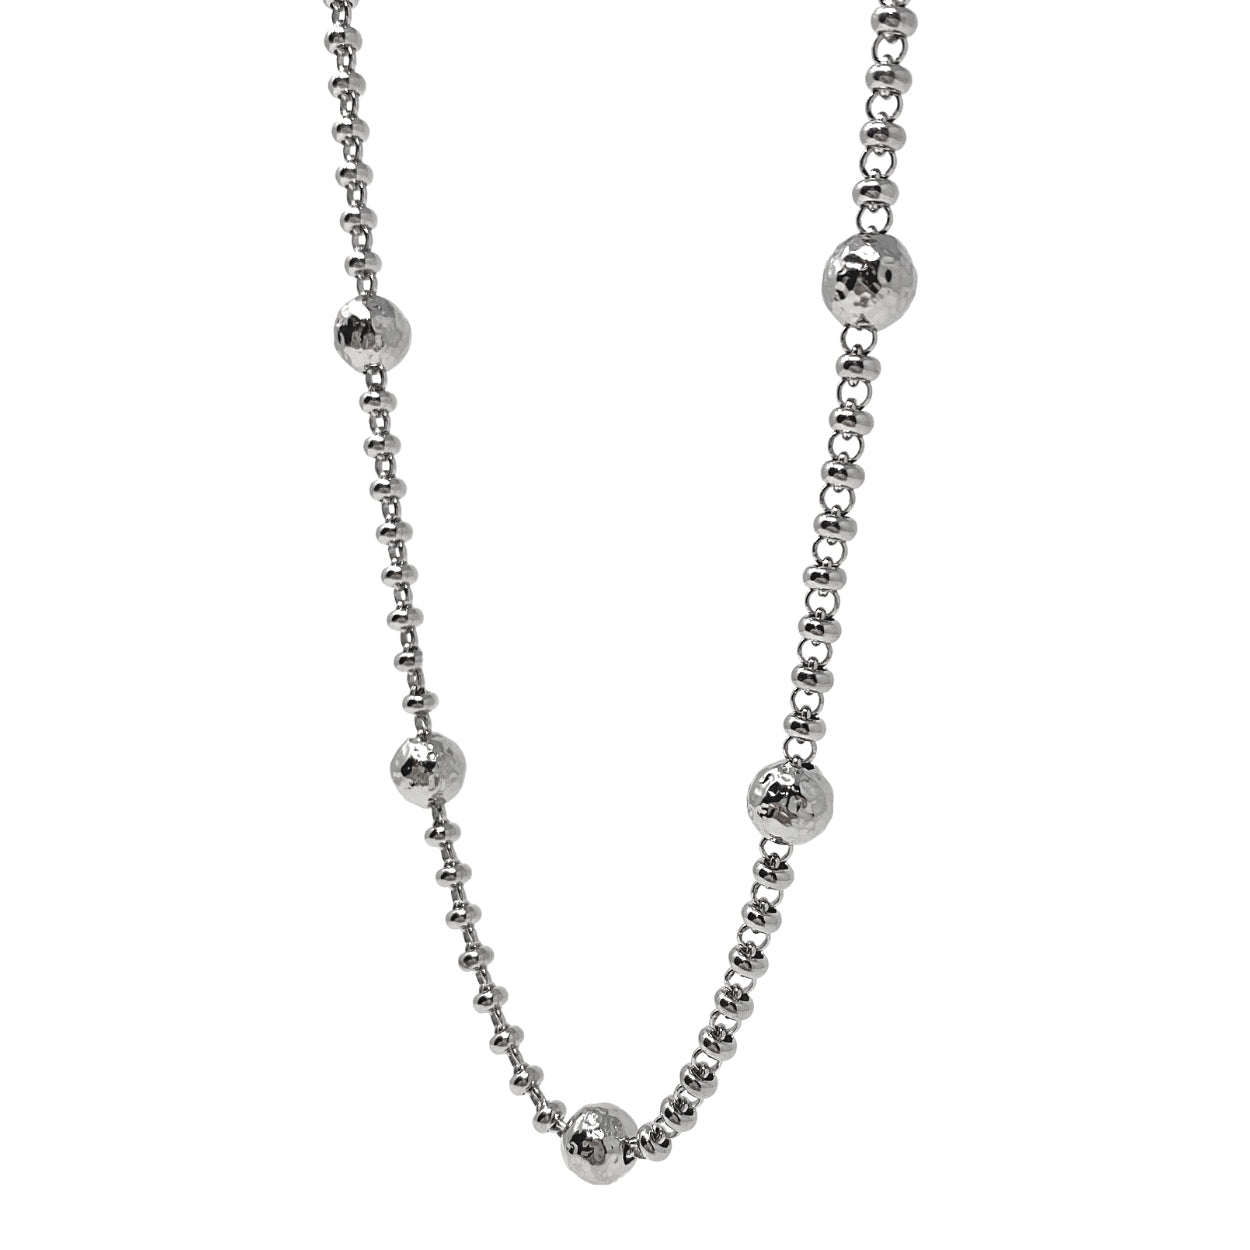 Bubbles Necklace in Silver